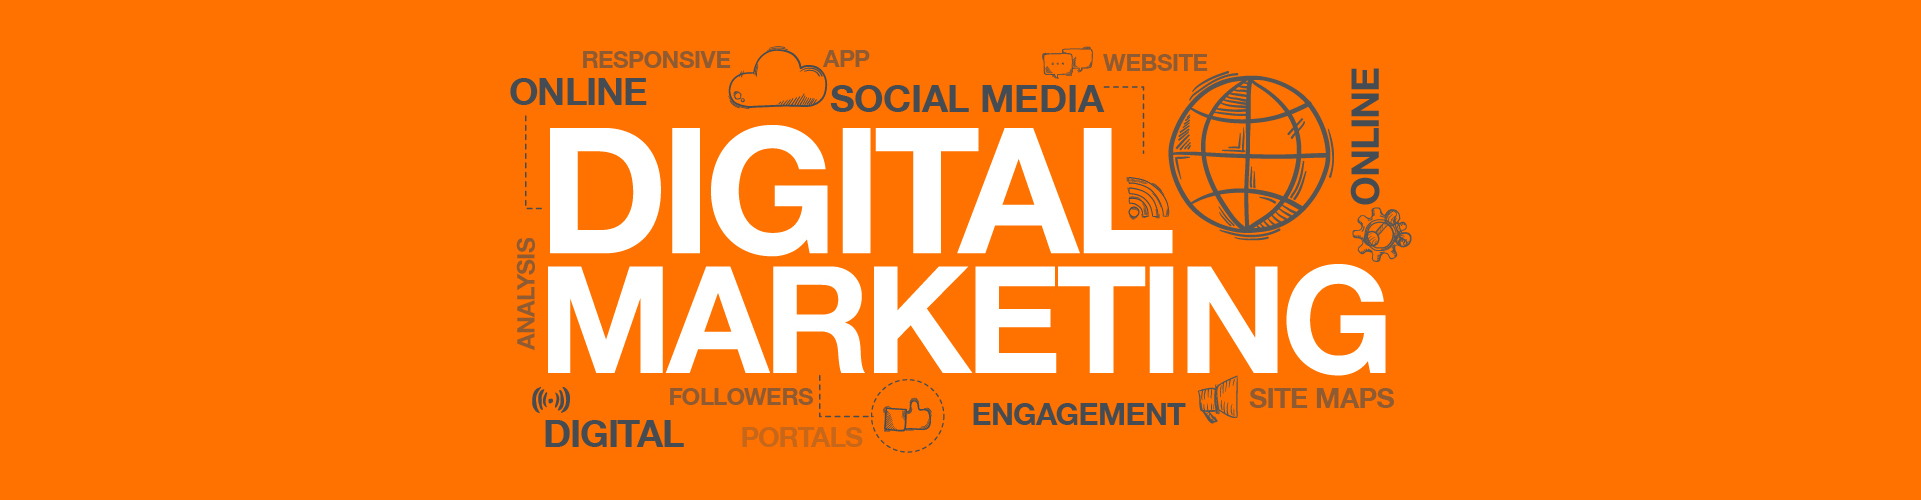 A orange visual with Digital Marketing as the title. There are some words and icons surrounding the title that refer to the subject.